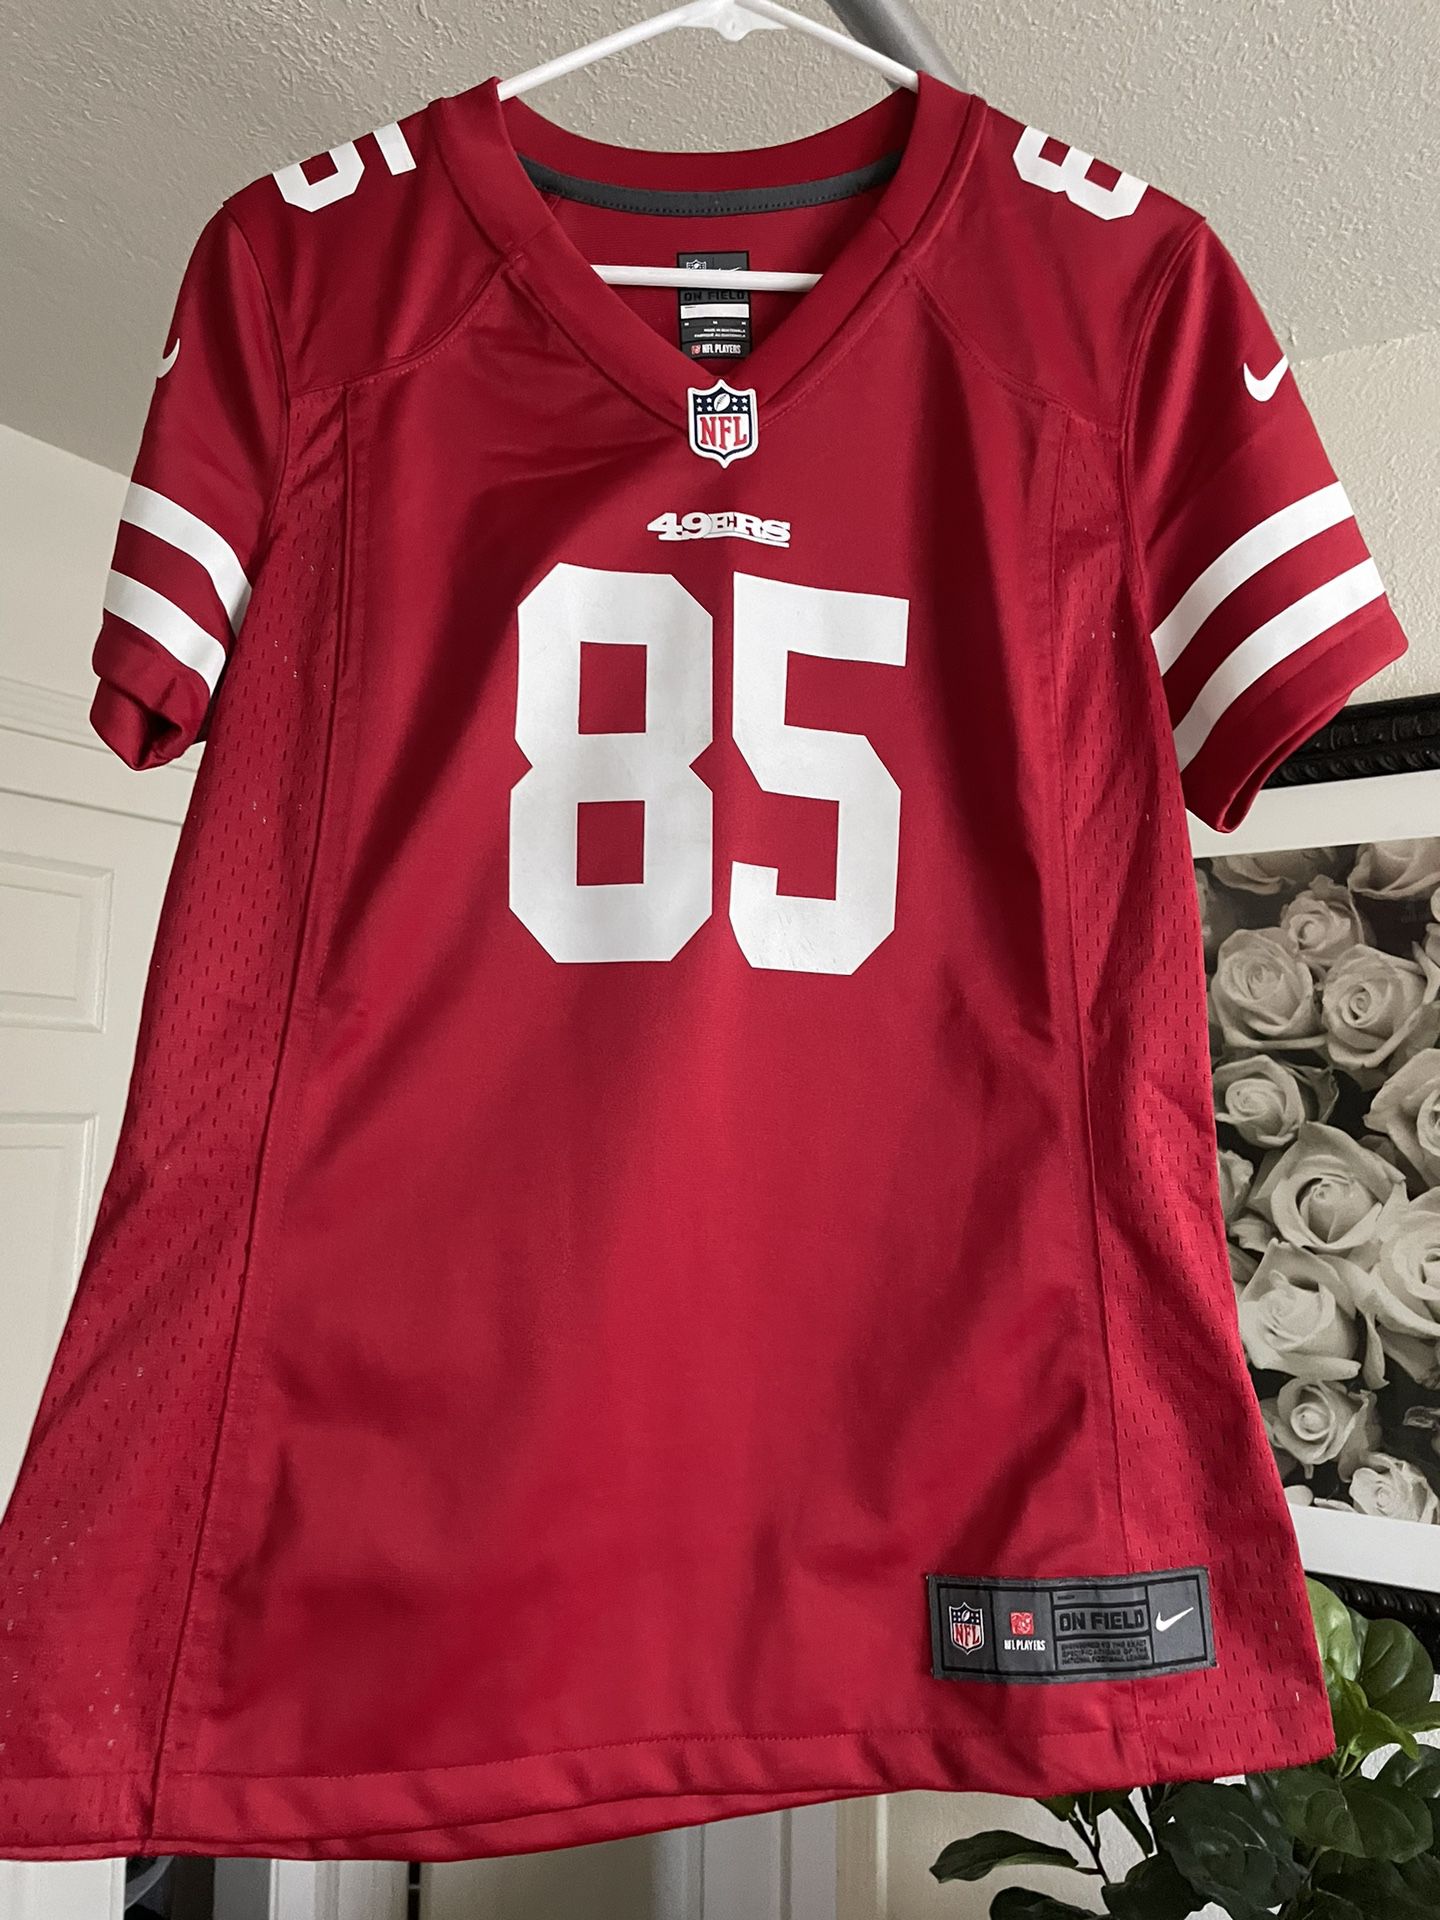 WOMEN'S 49ERS KITTLE JERSEY for Sale in Atherton, CA - OfferUp